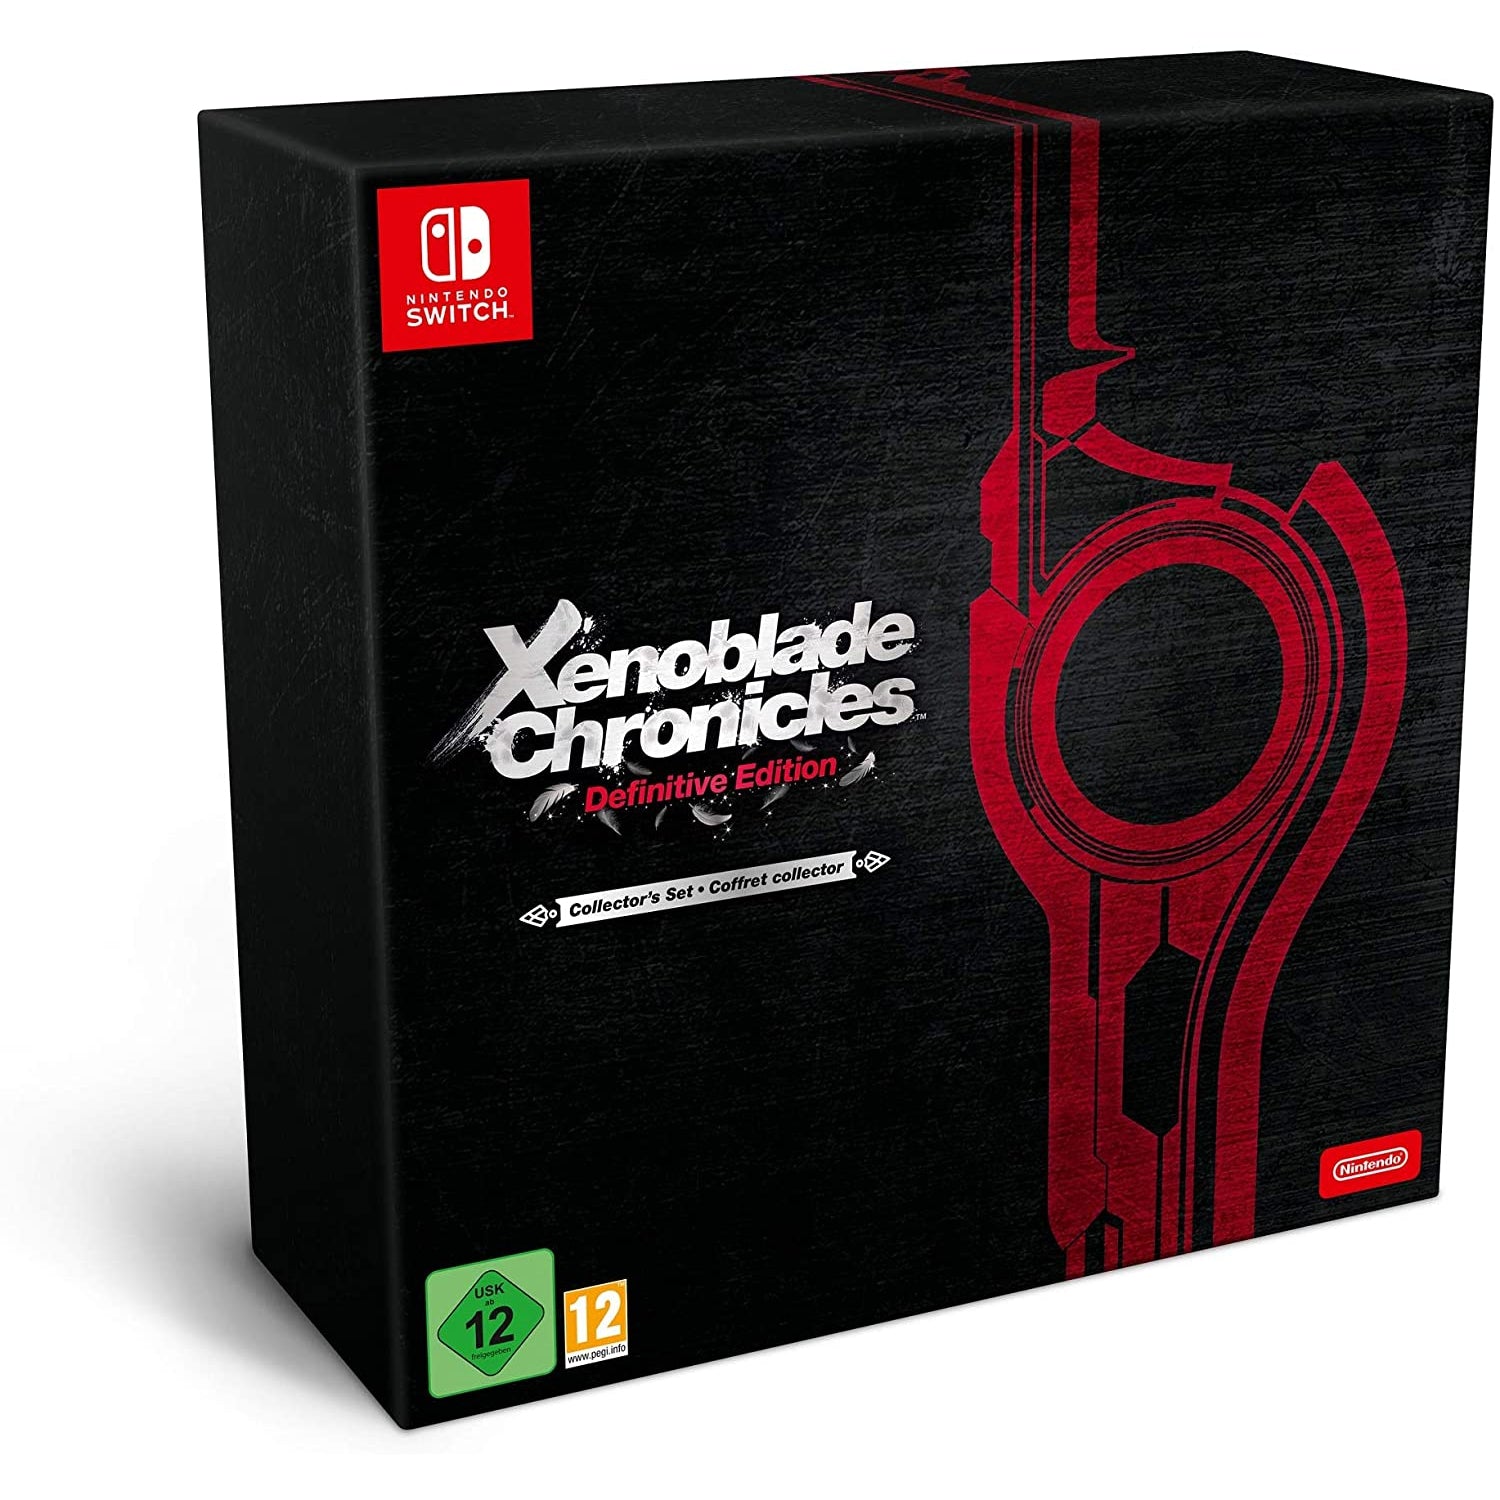 Xenoblade Chronicles: Definitive Edition Collector's Set for Nintendo Switch